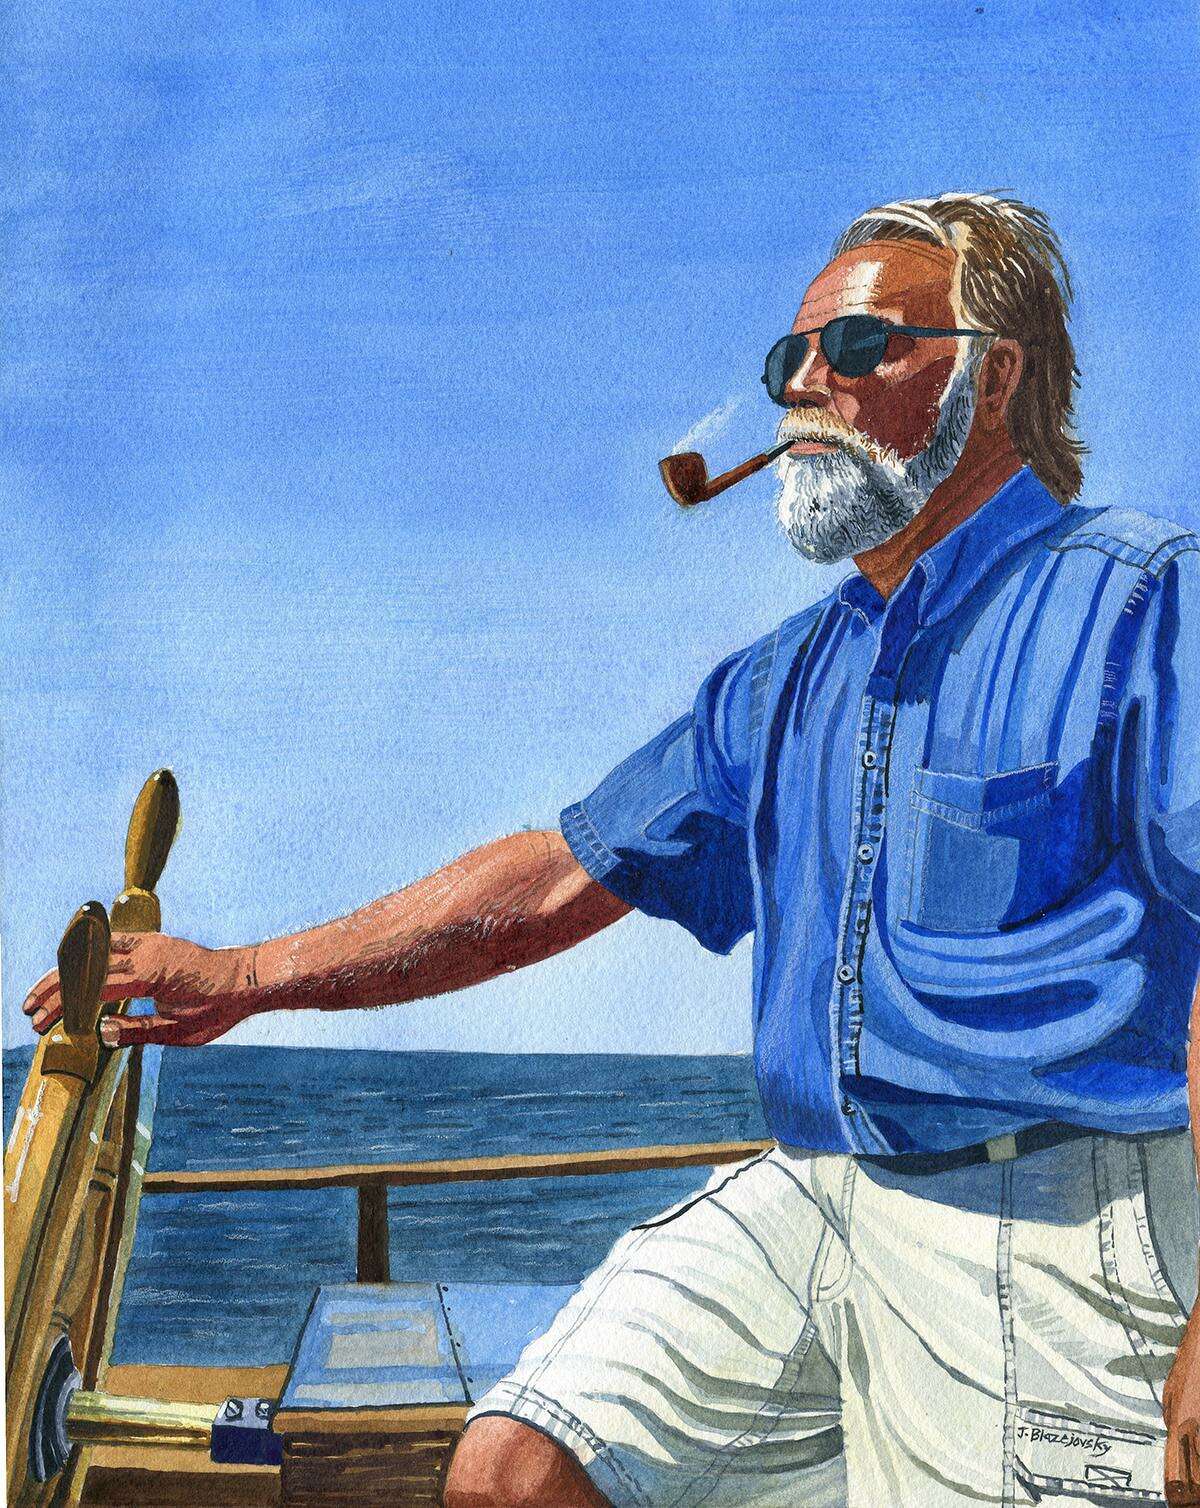 Spectrum Art Gallery and Store of Centerbrook presents the Summer Arts Festival Gallery Show, a six-week exhibit (May 31-July 14) of select works by artists participating in the upcoming Summer Arts Festival on the Essex Connecticut Town Green. Pictured is “The Captain,” a watercolor by Jeffrey Blazejovsky.